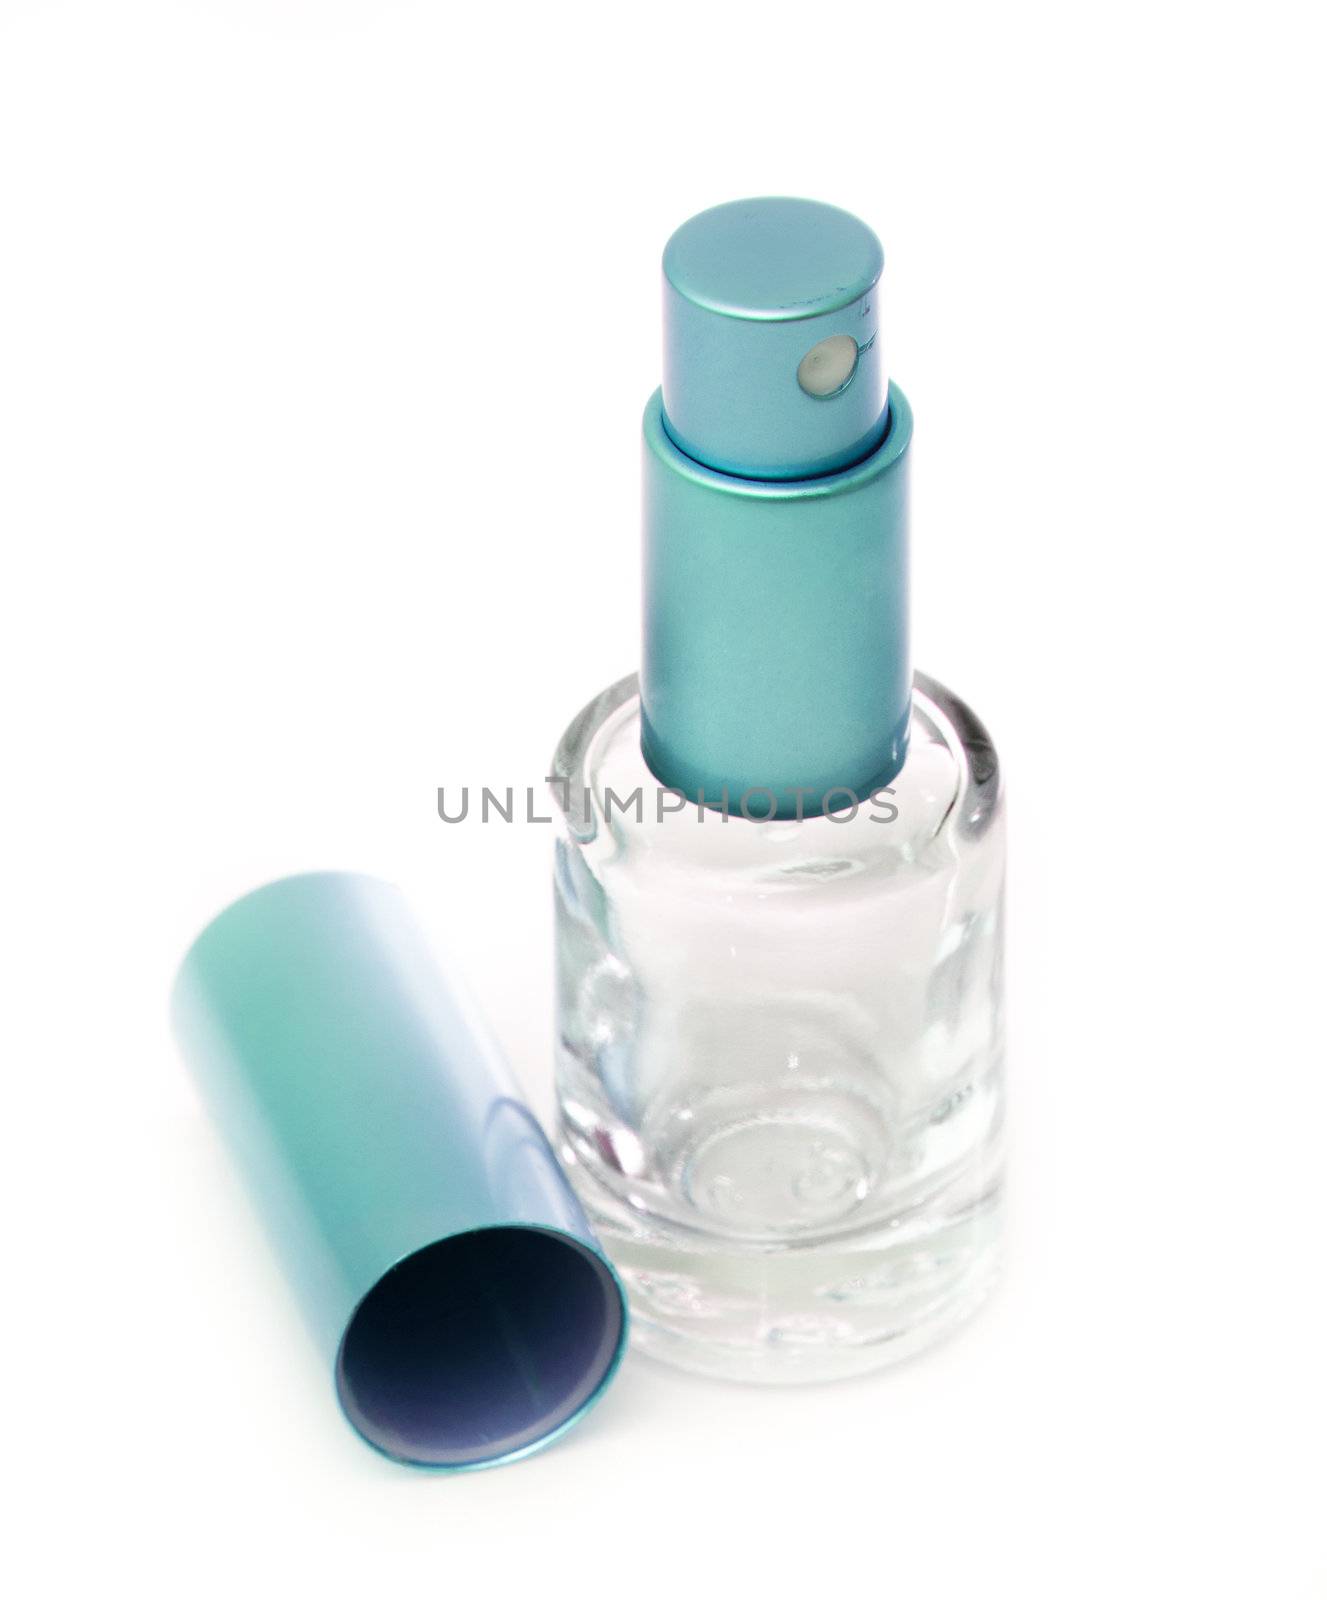 empty blue glass perfume bottle on a white backgroung